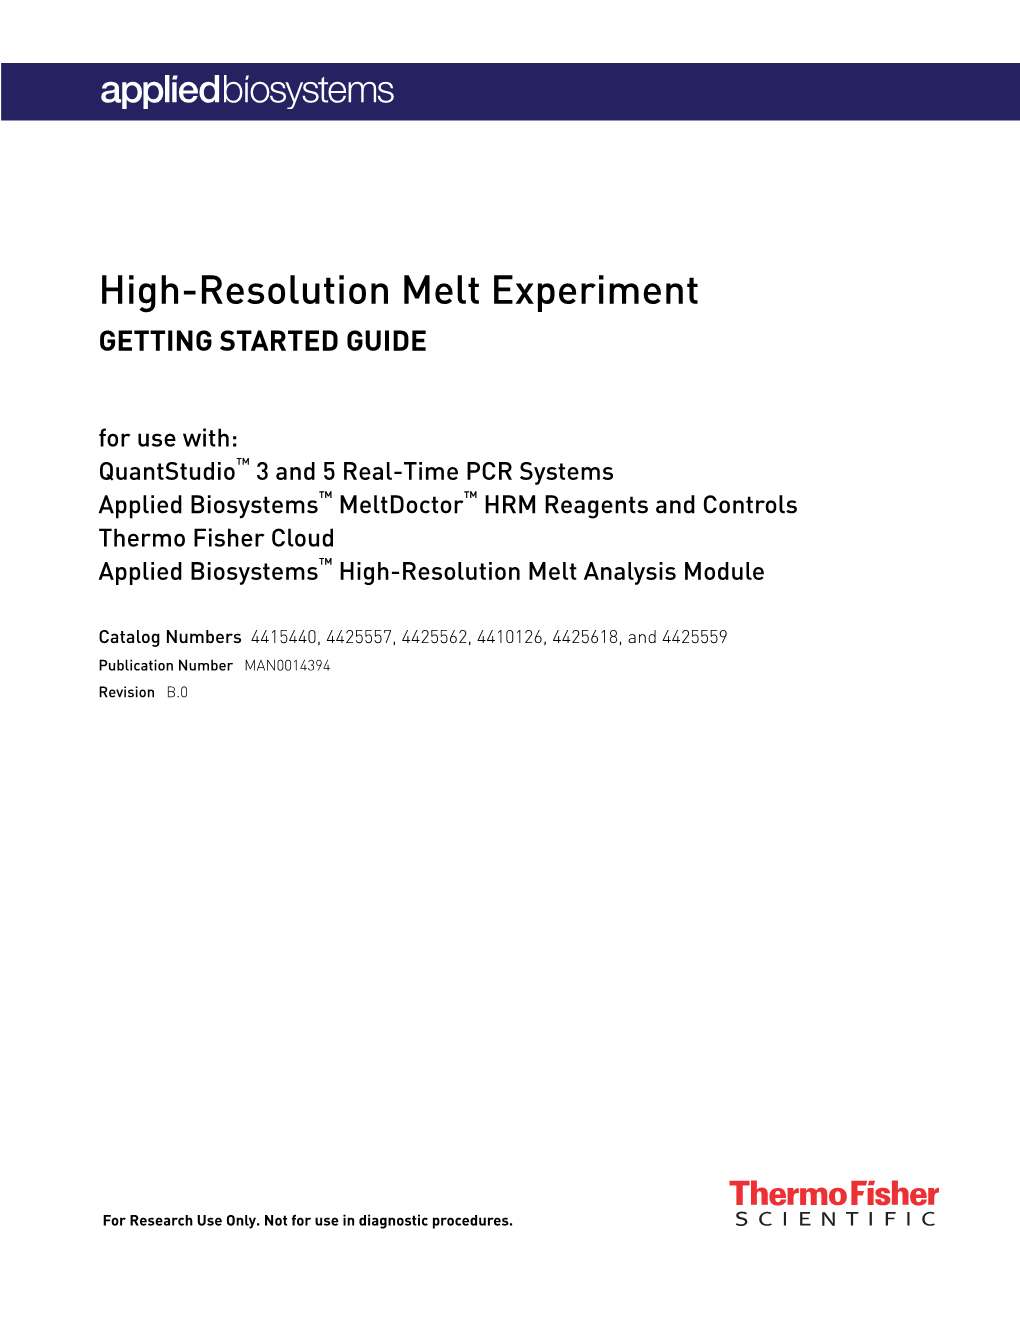 Applied Biosystems High-Resolution Melt Getting Started Guide